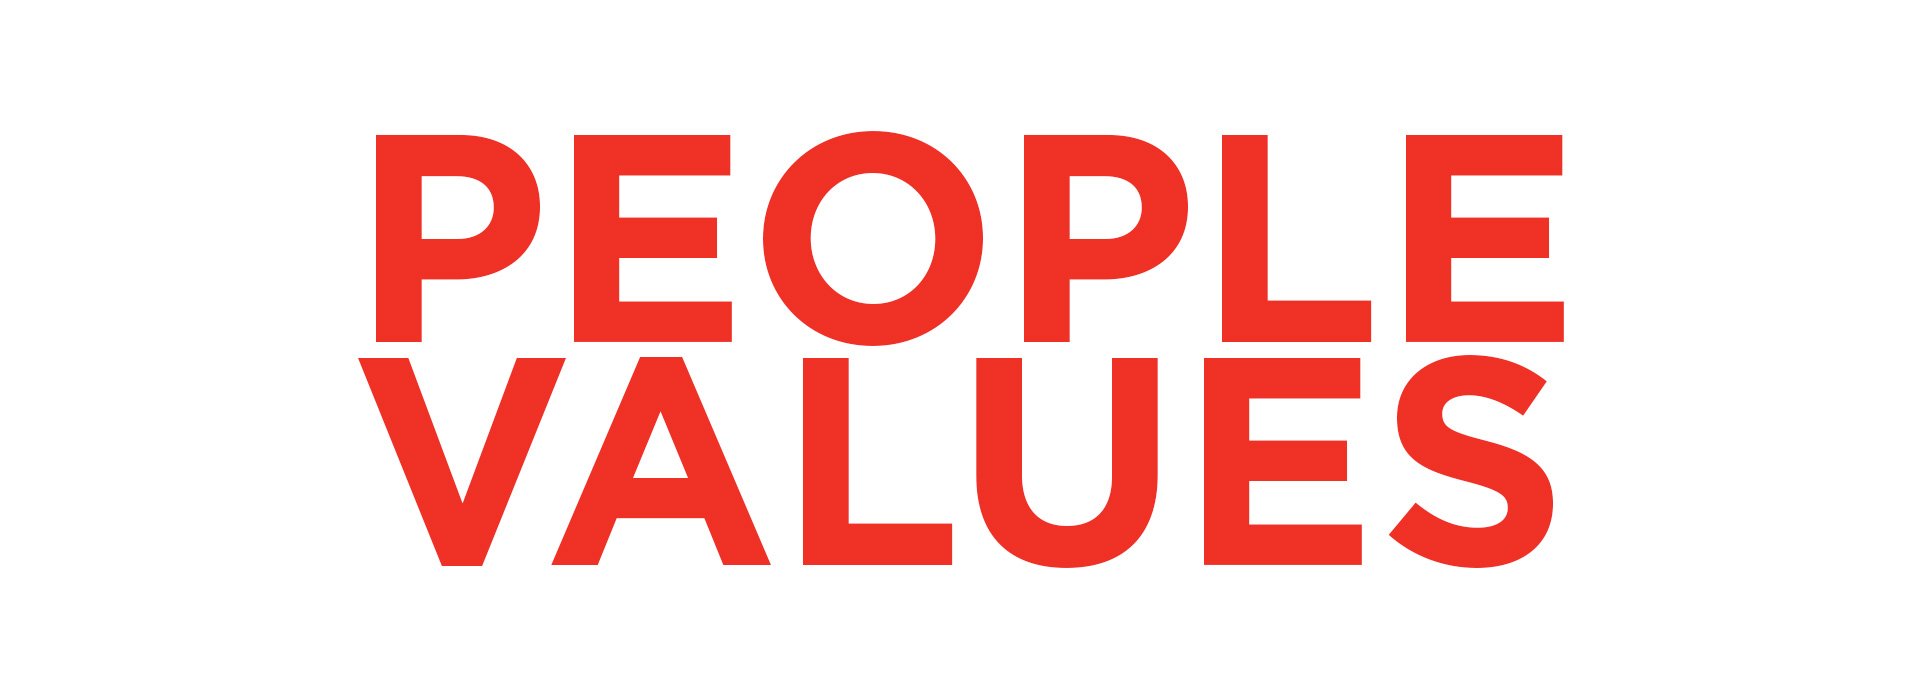 People Values red